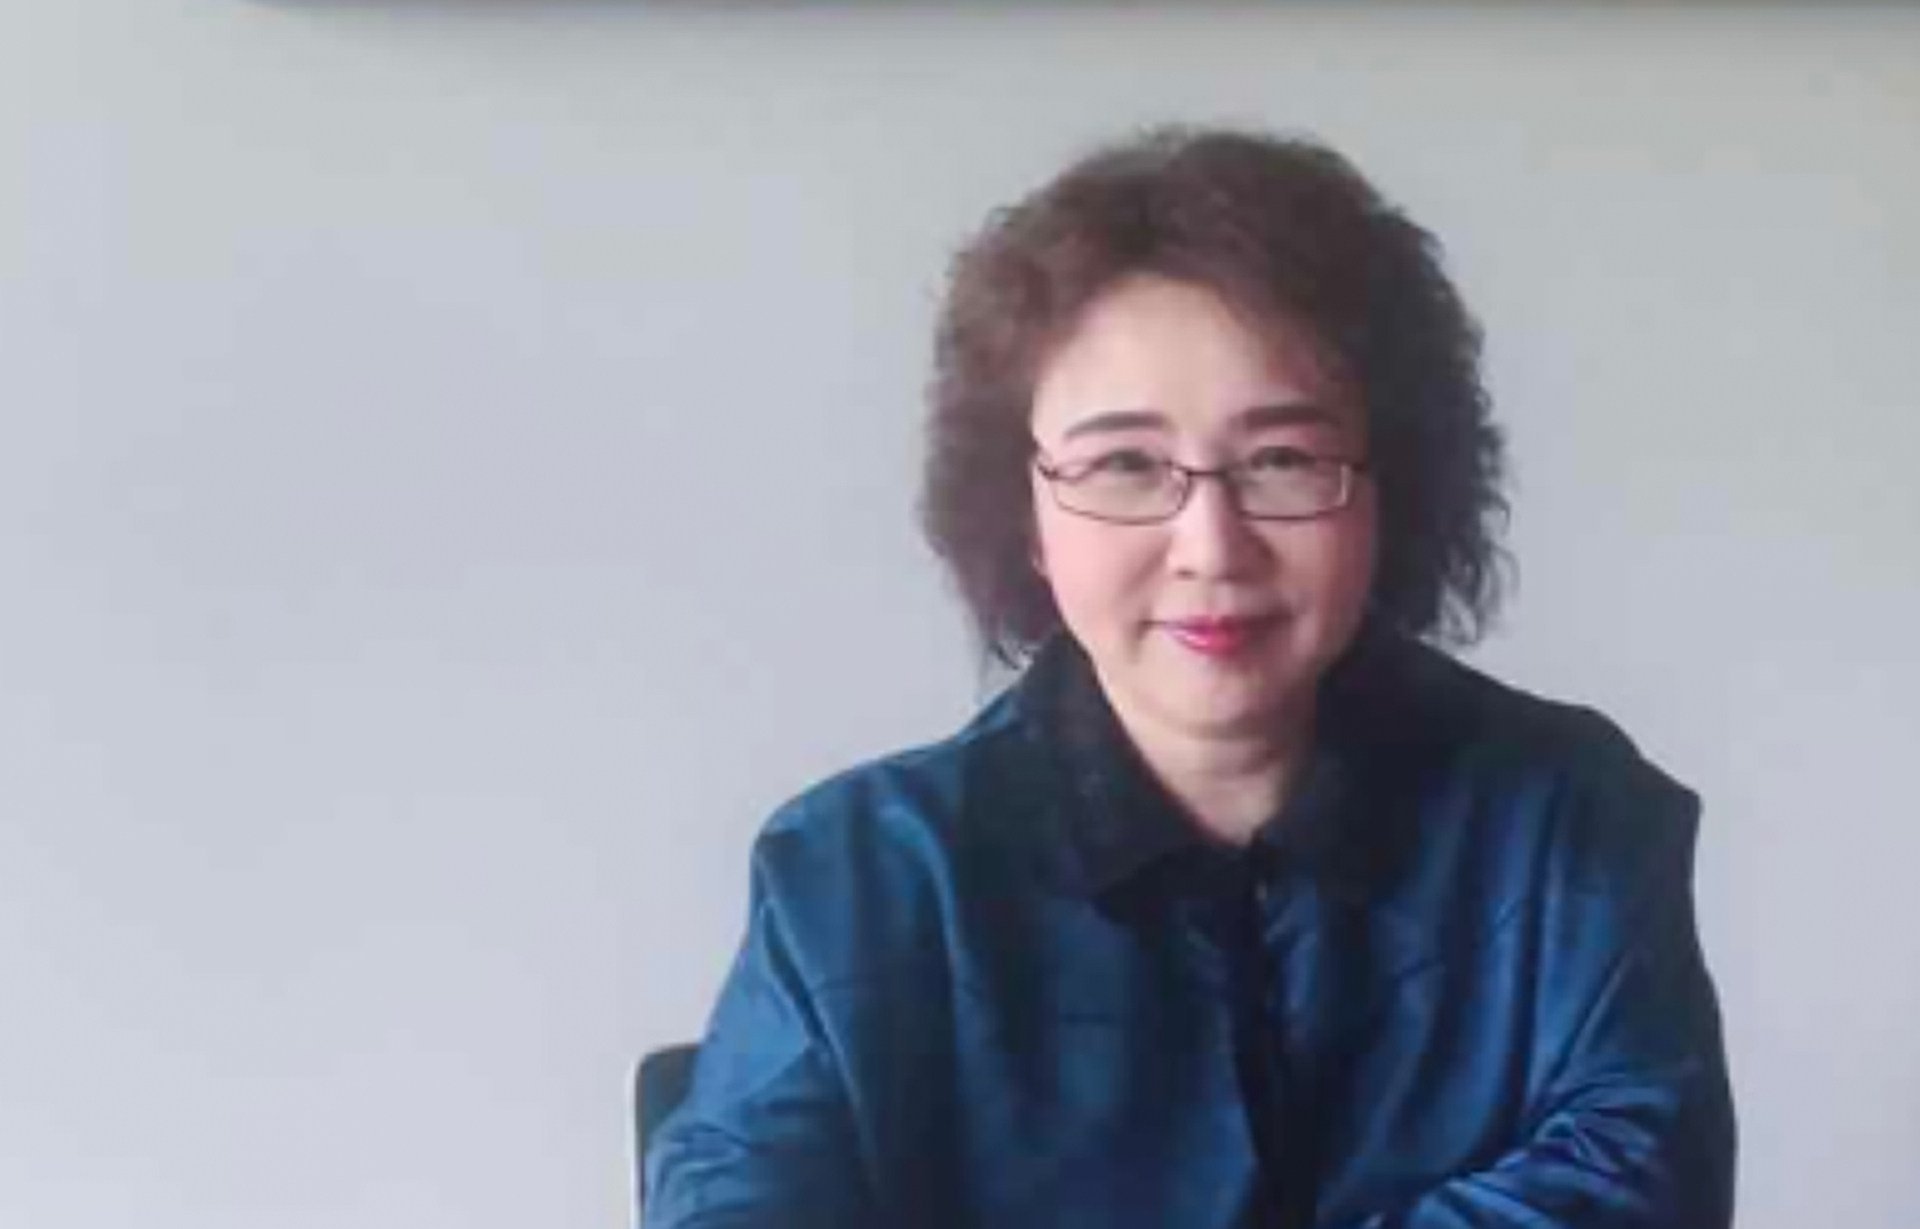 Elizabeth Zhong, also known as Ying Zhong, was found murdered in Auckland in November 2020. Photo: New Zealand Police Handout via New Zealand Herald